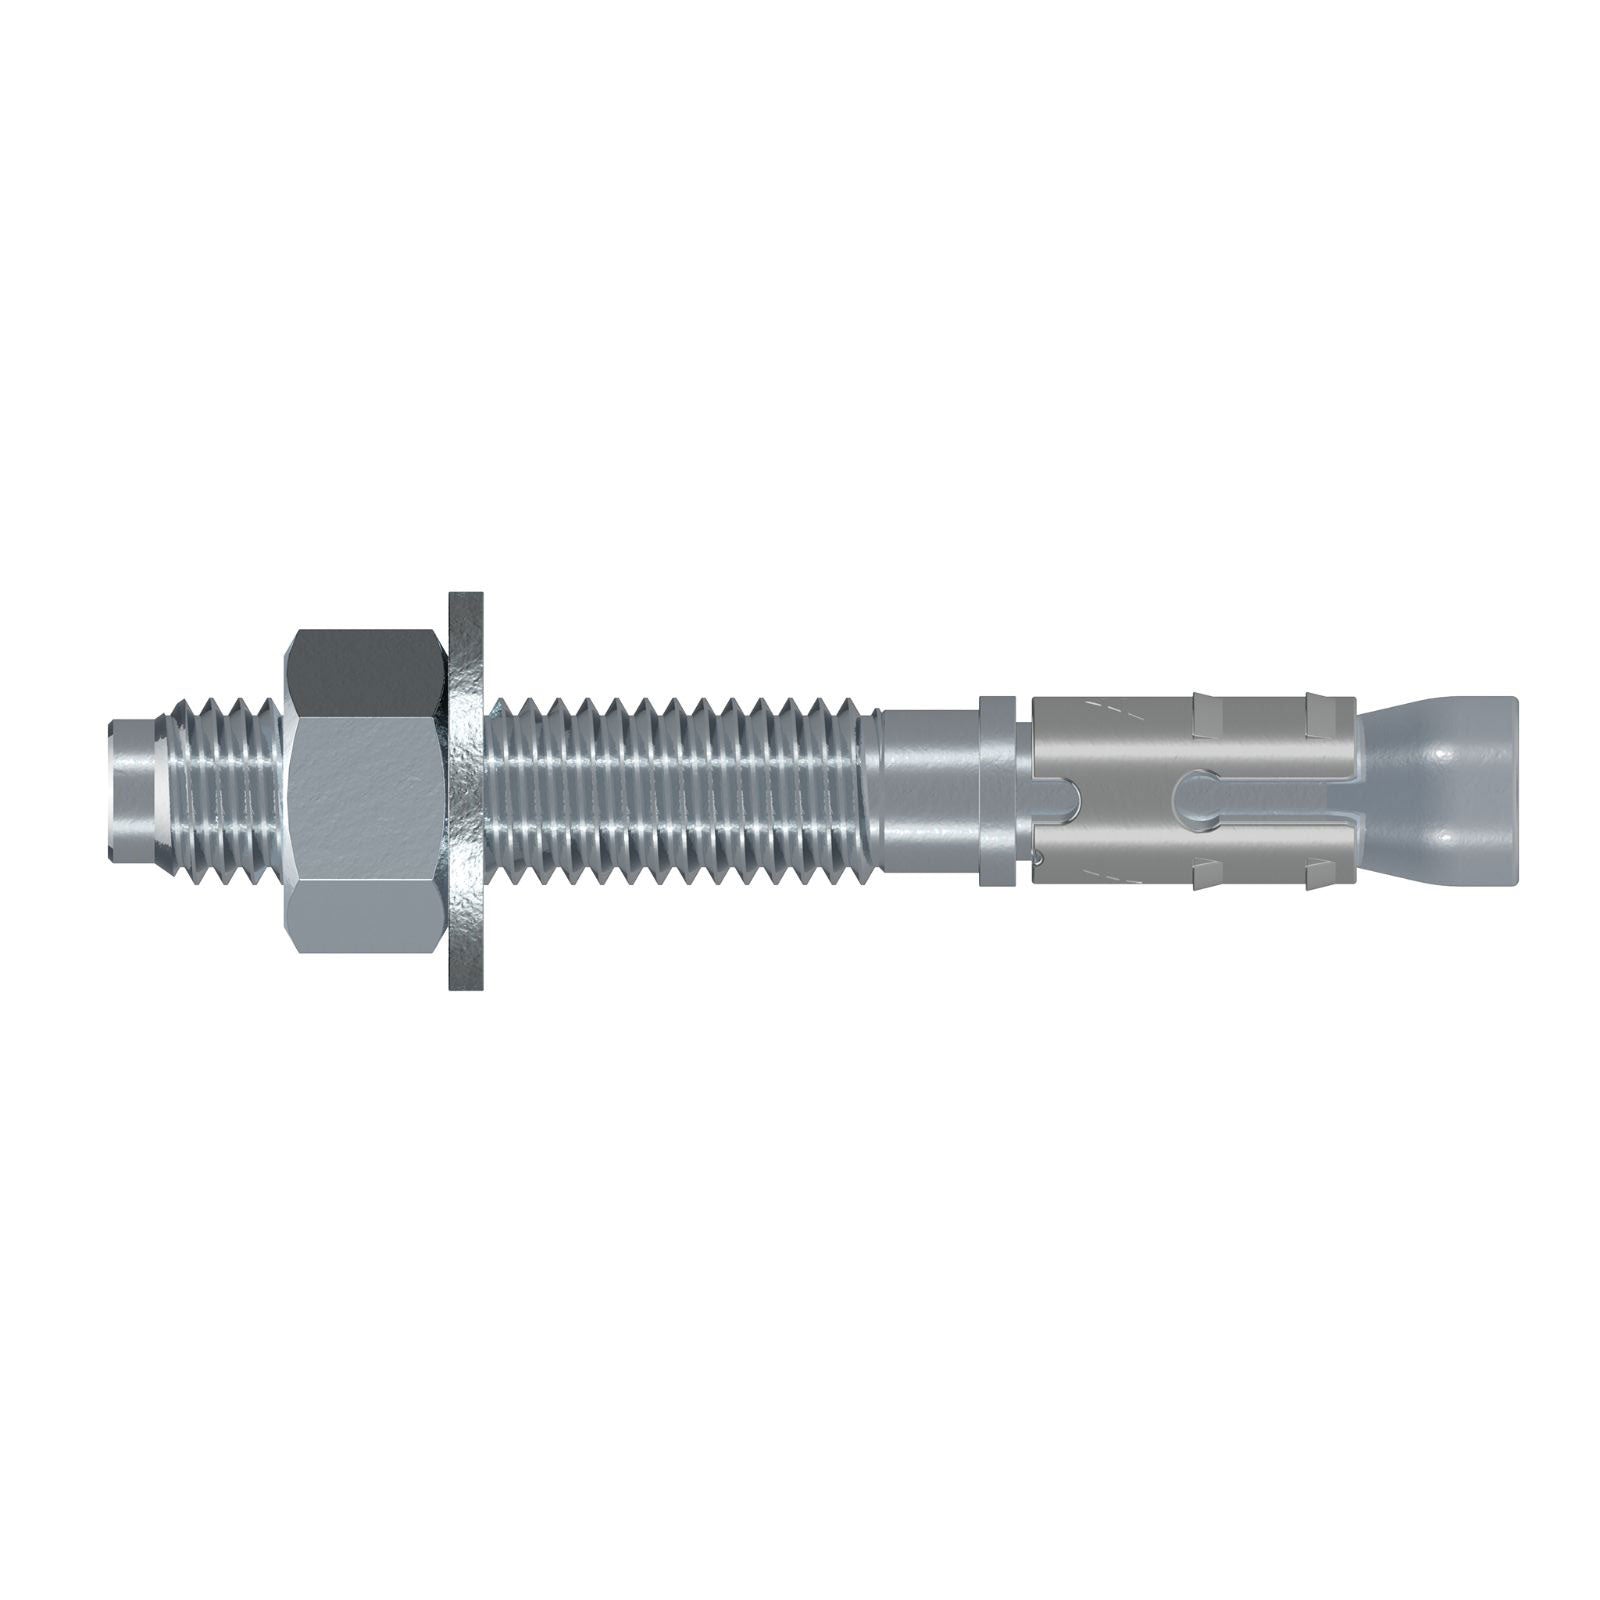 Concrete Anchors & Fasteners